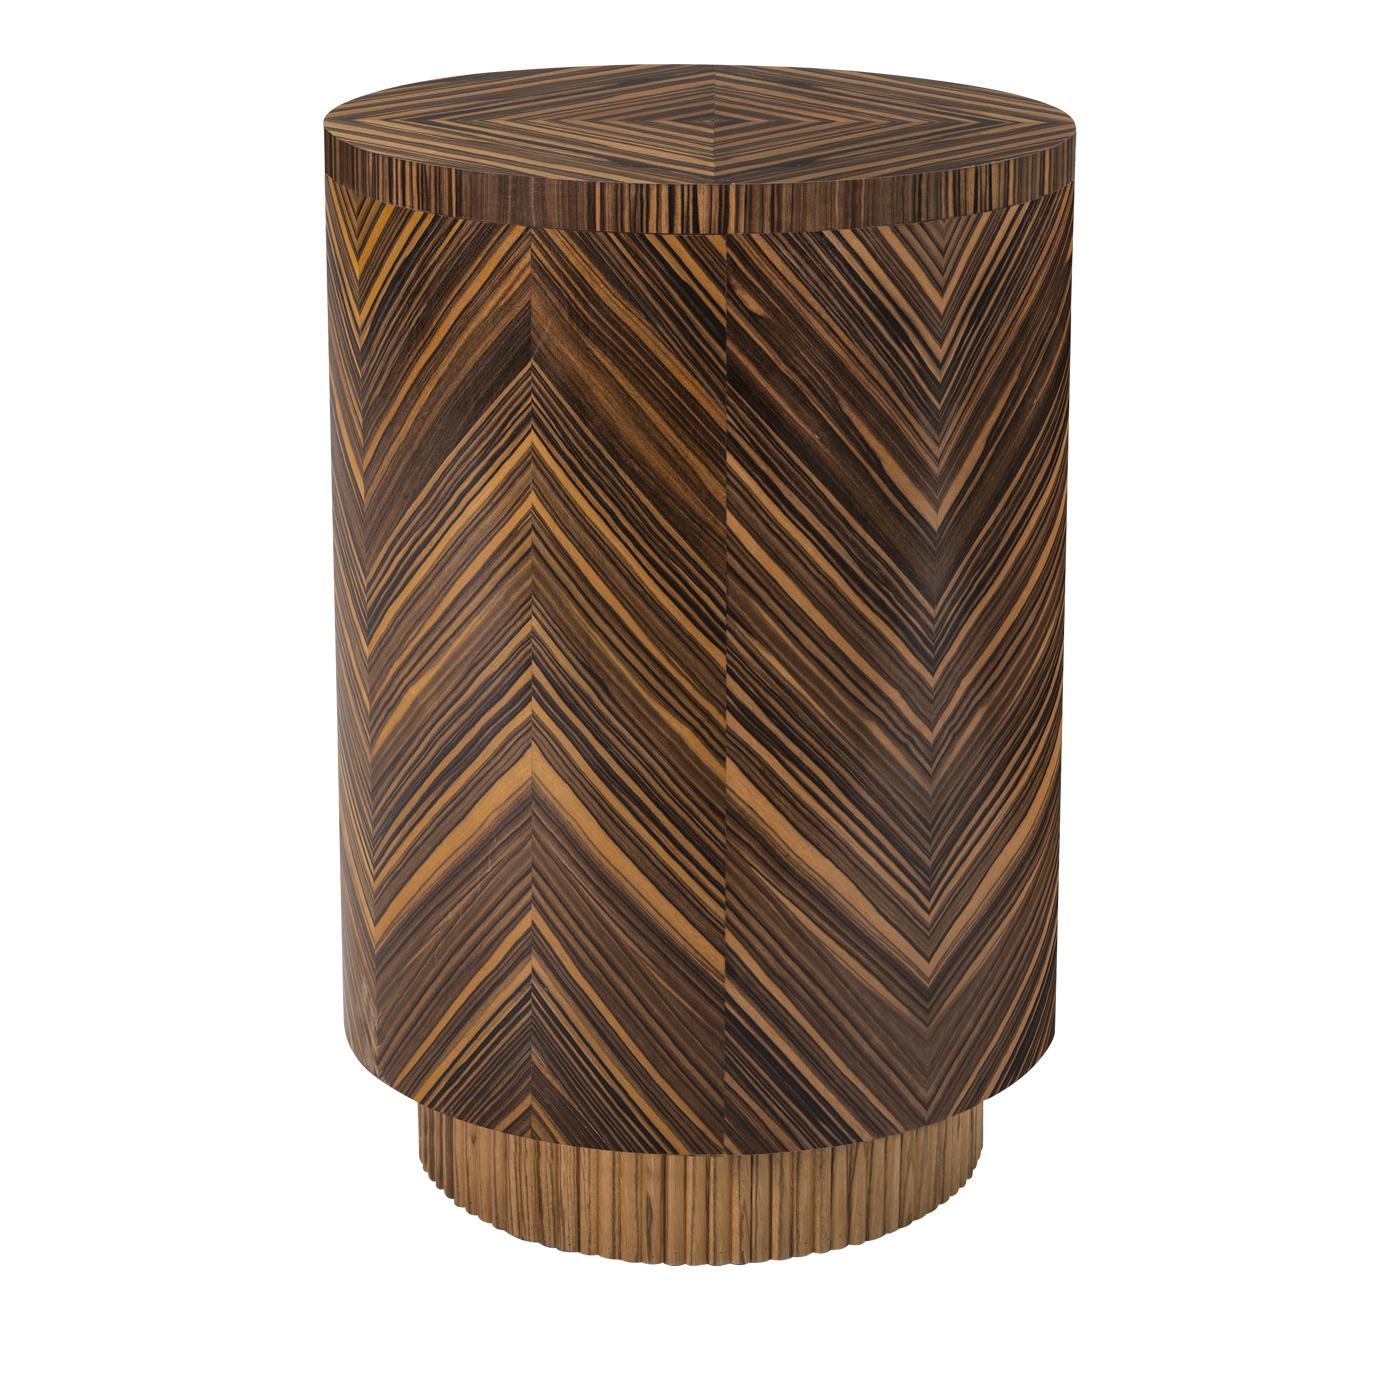 This bedside table features three drawers for ample storage, and its outer perimeter was crafted entirely in ebony Macassar wood with 45 degree crosscut patterns with an almond finish. It also features a zebrawood base that makes a striking